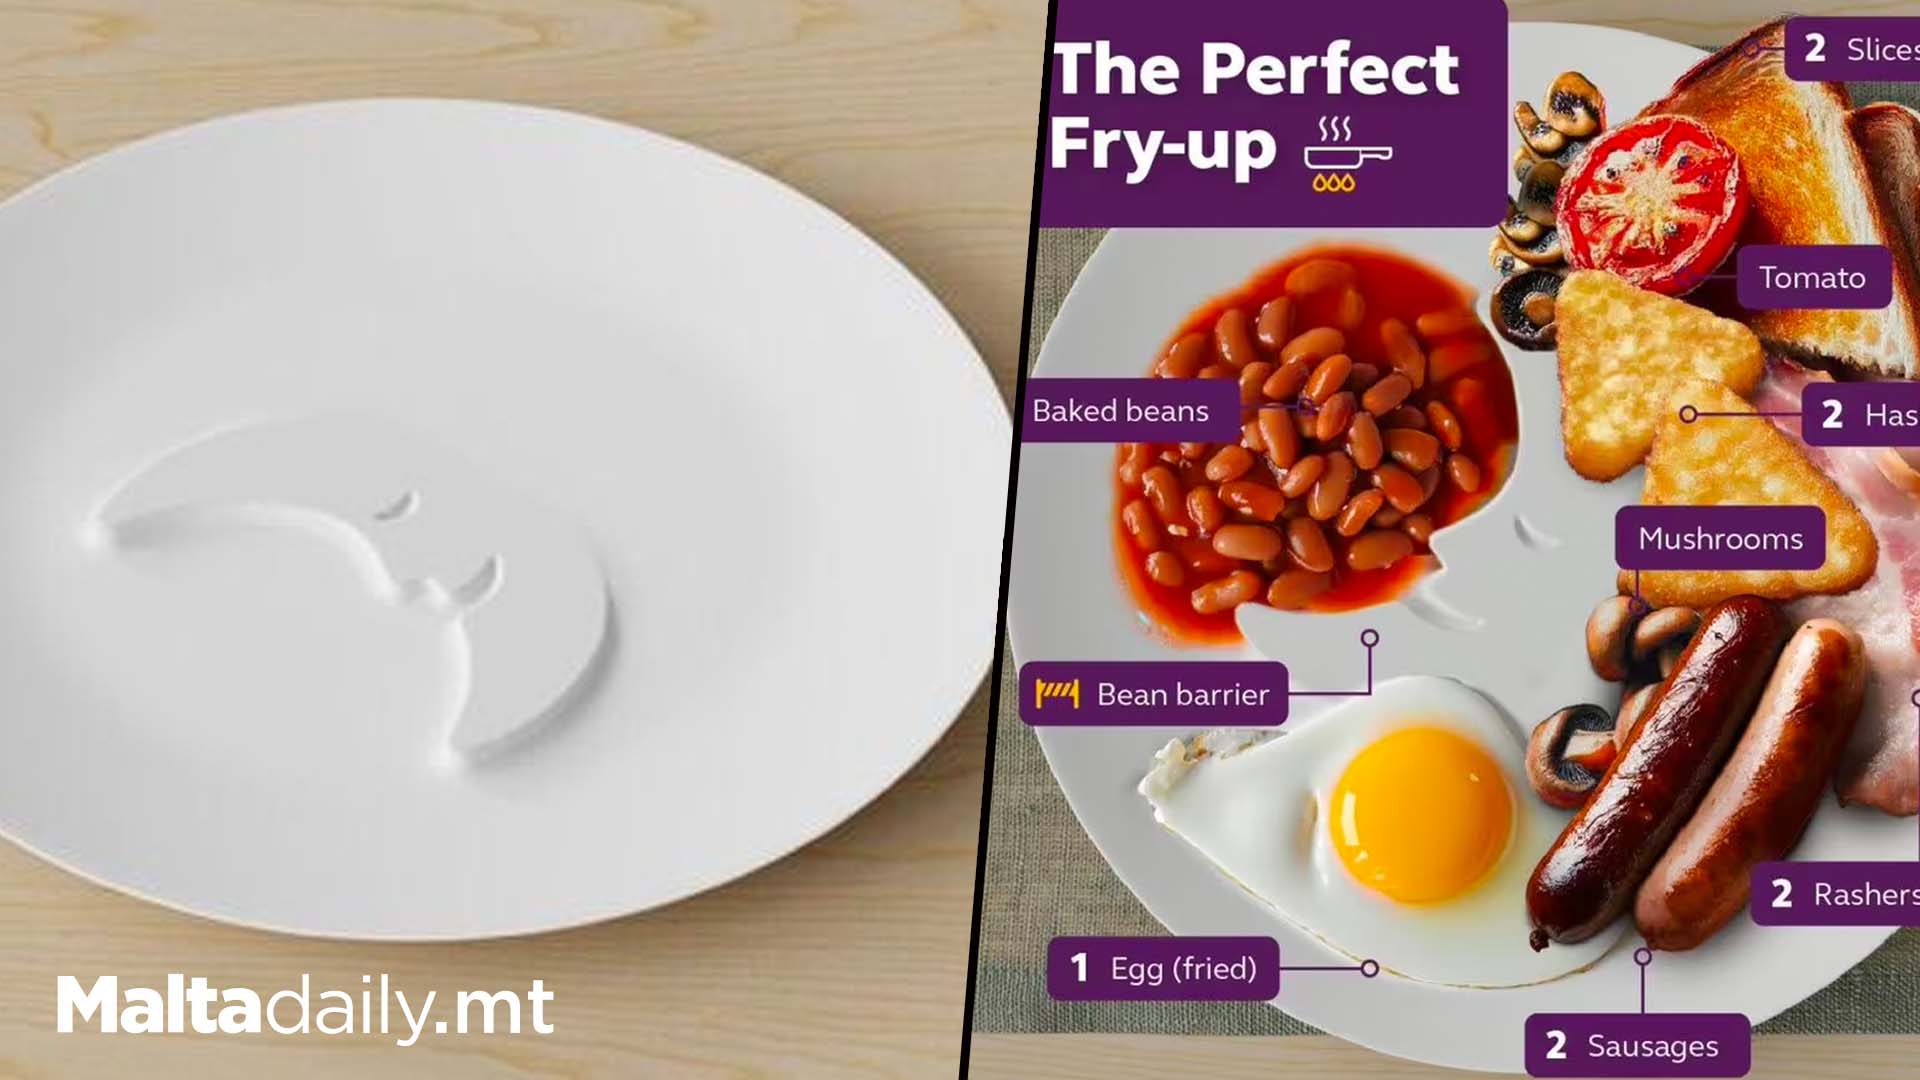 Hotel Invents Plate Which Keeps Beans & Other Foods Separate